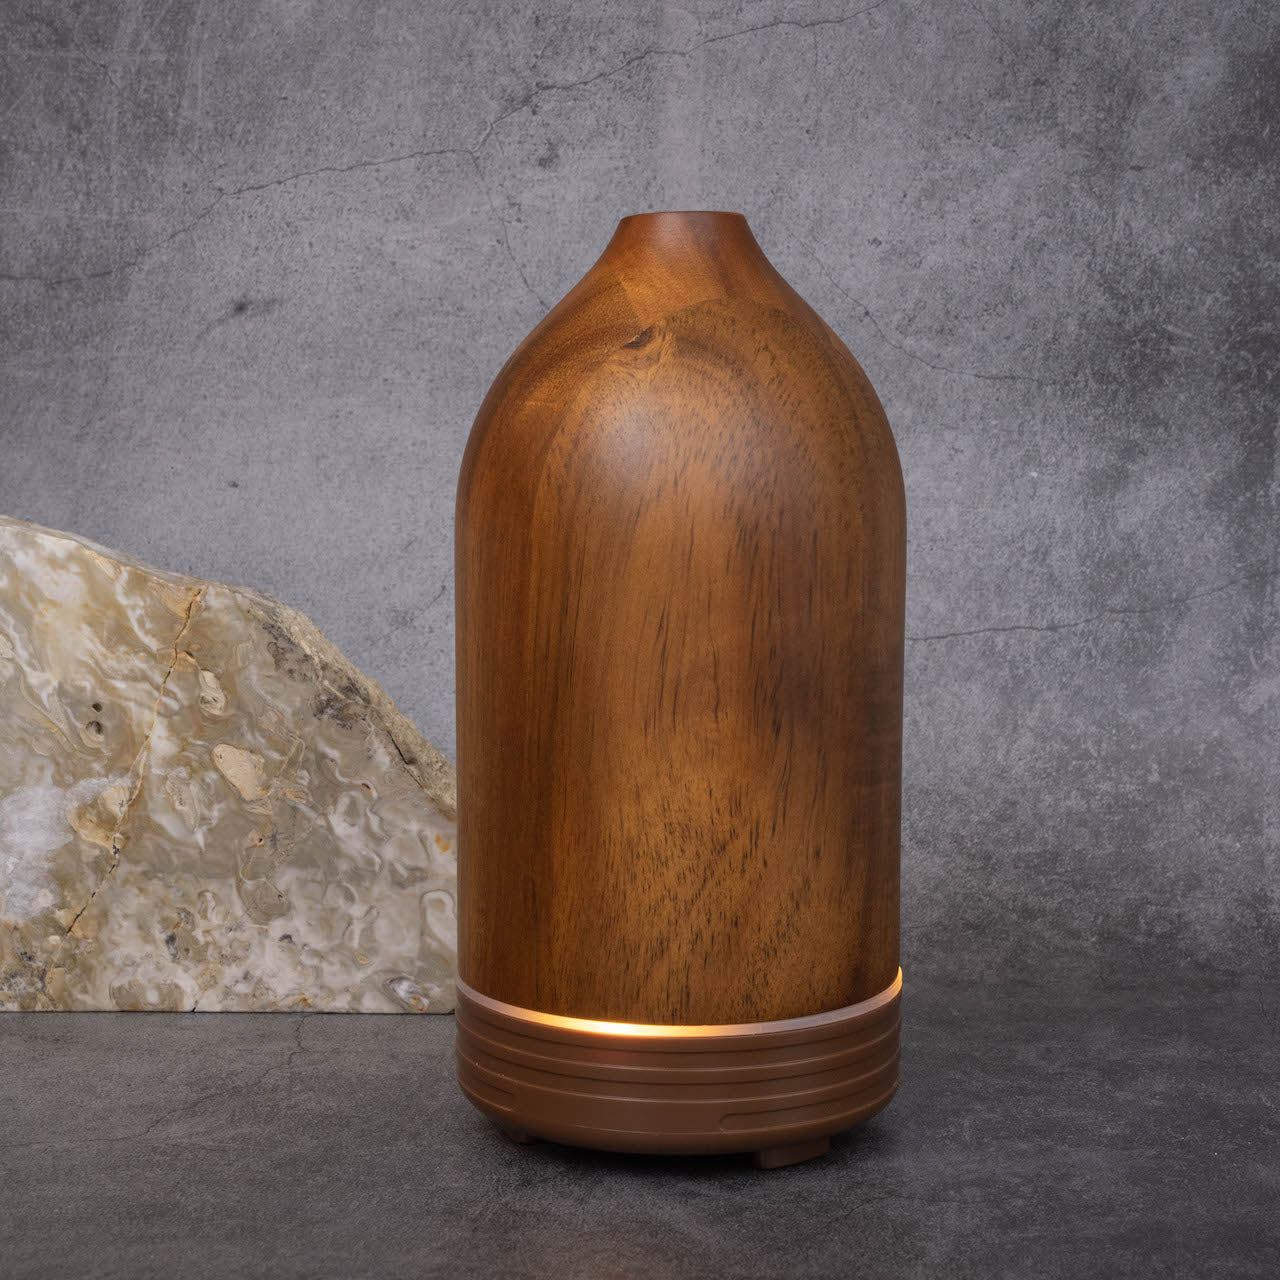 A cone-shaped dark wooden essential oil diffuser. There is band of light around the bottom indicating it has been turned on.